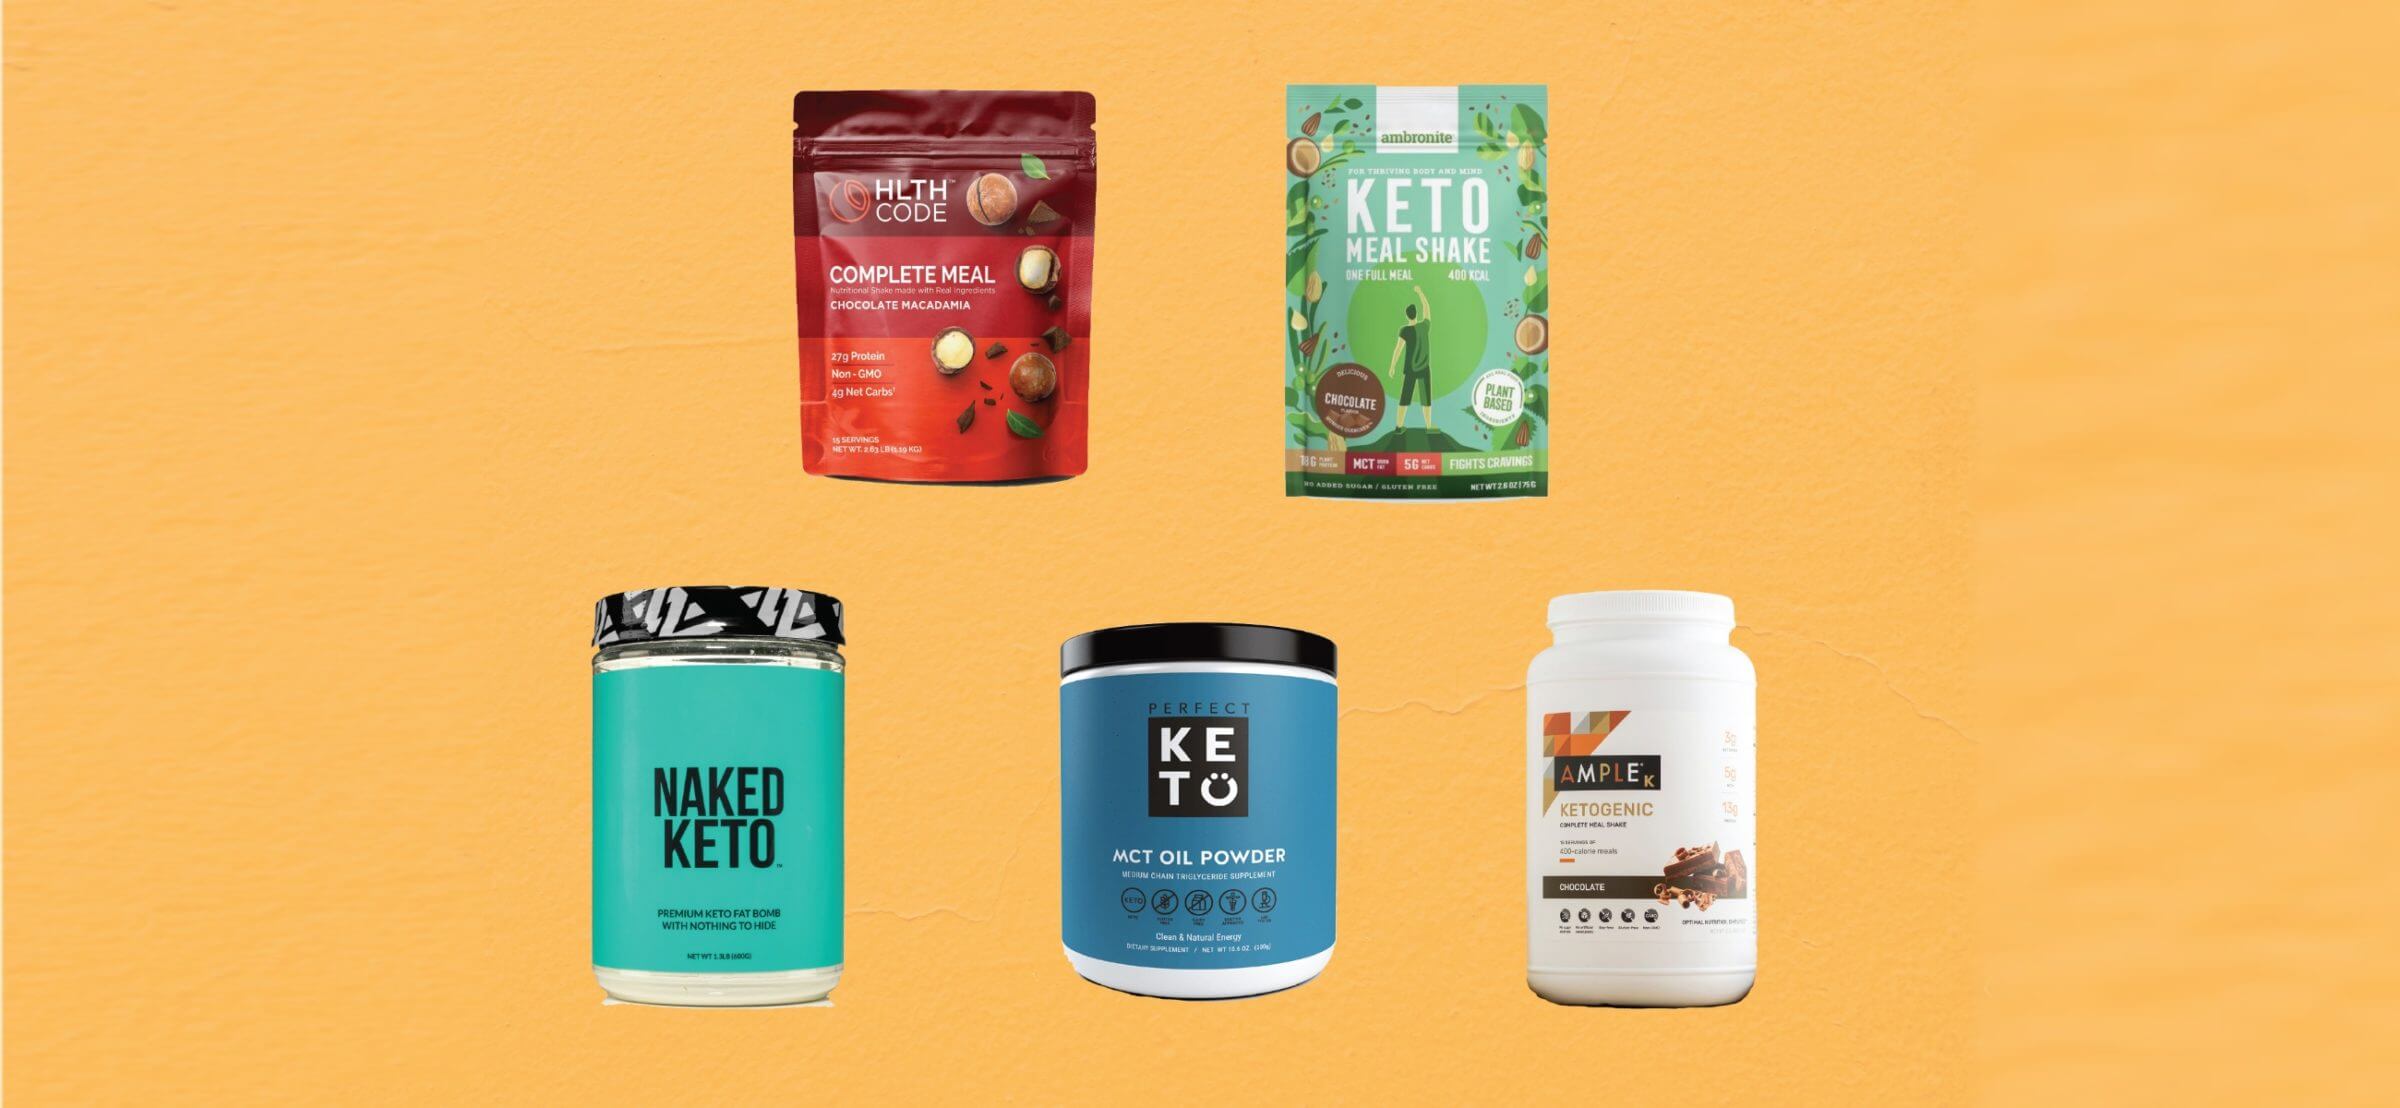 Best keto meal replacement shakes